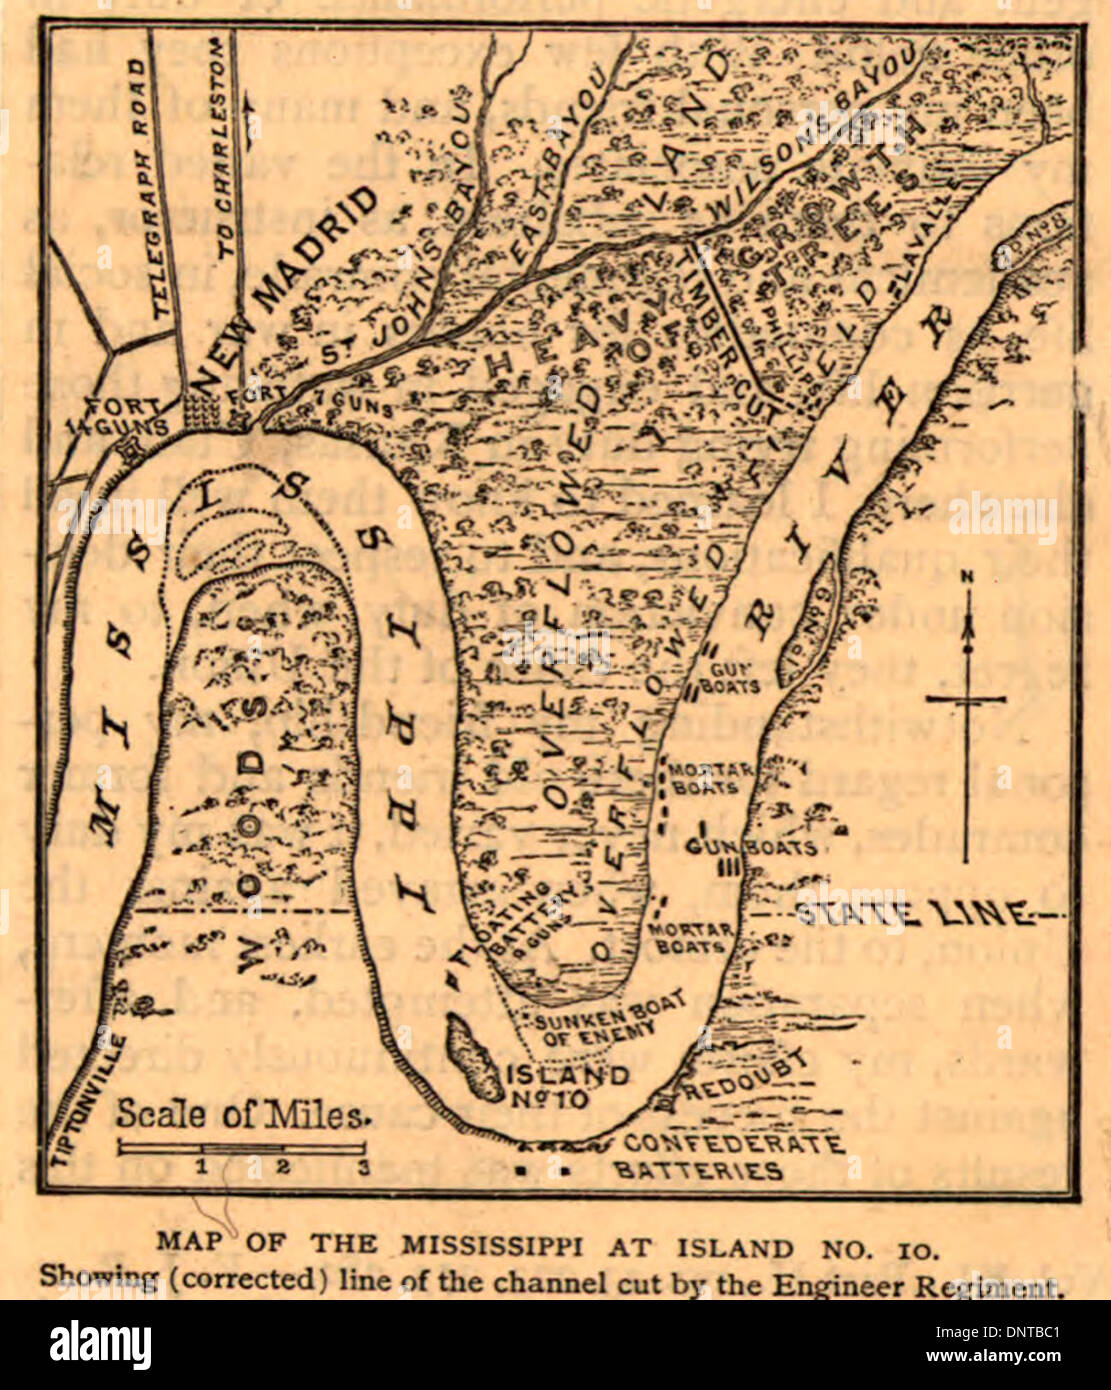 Map of the Mississippi at Island no. 10. Showing (corrected) line of the channel cut by the Engineer Regiment. 1862 USA Civil War Stock Photo